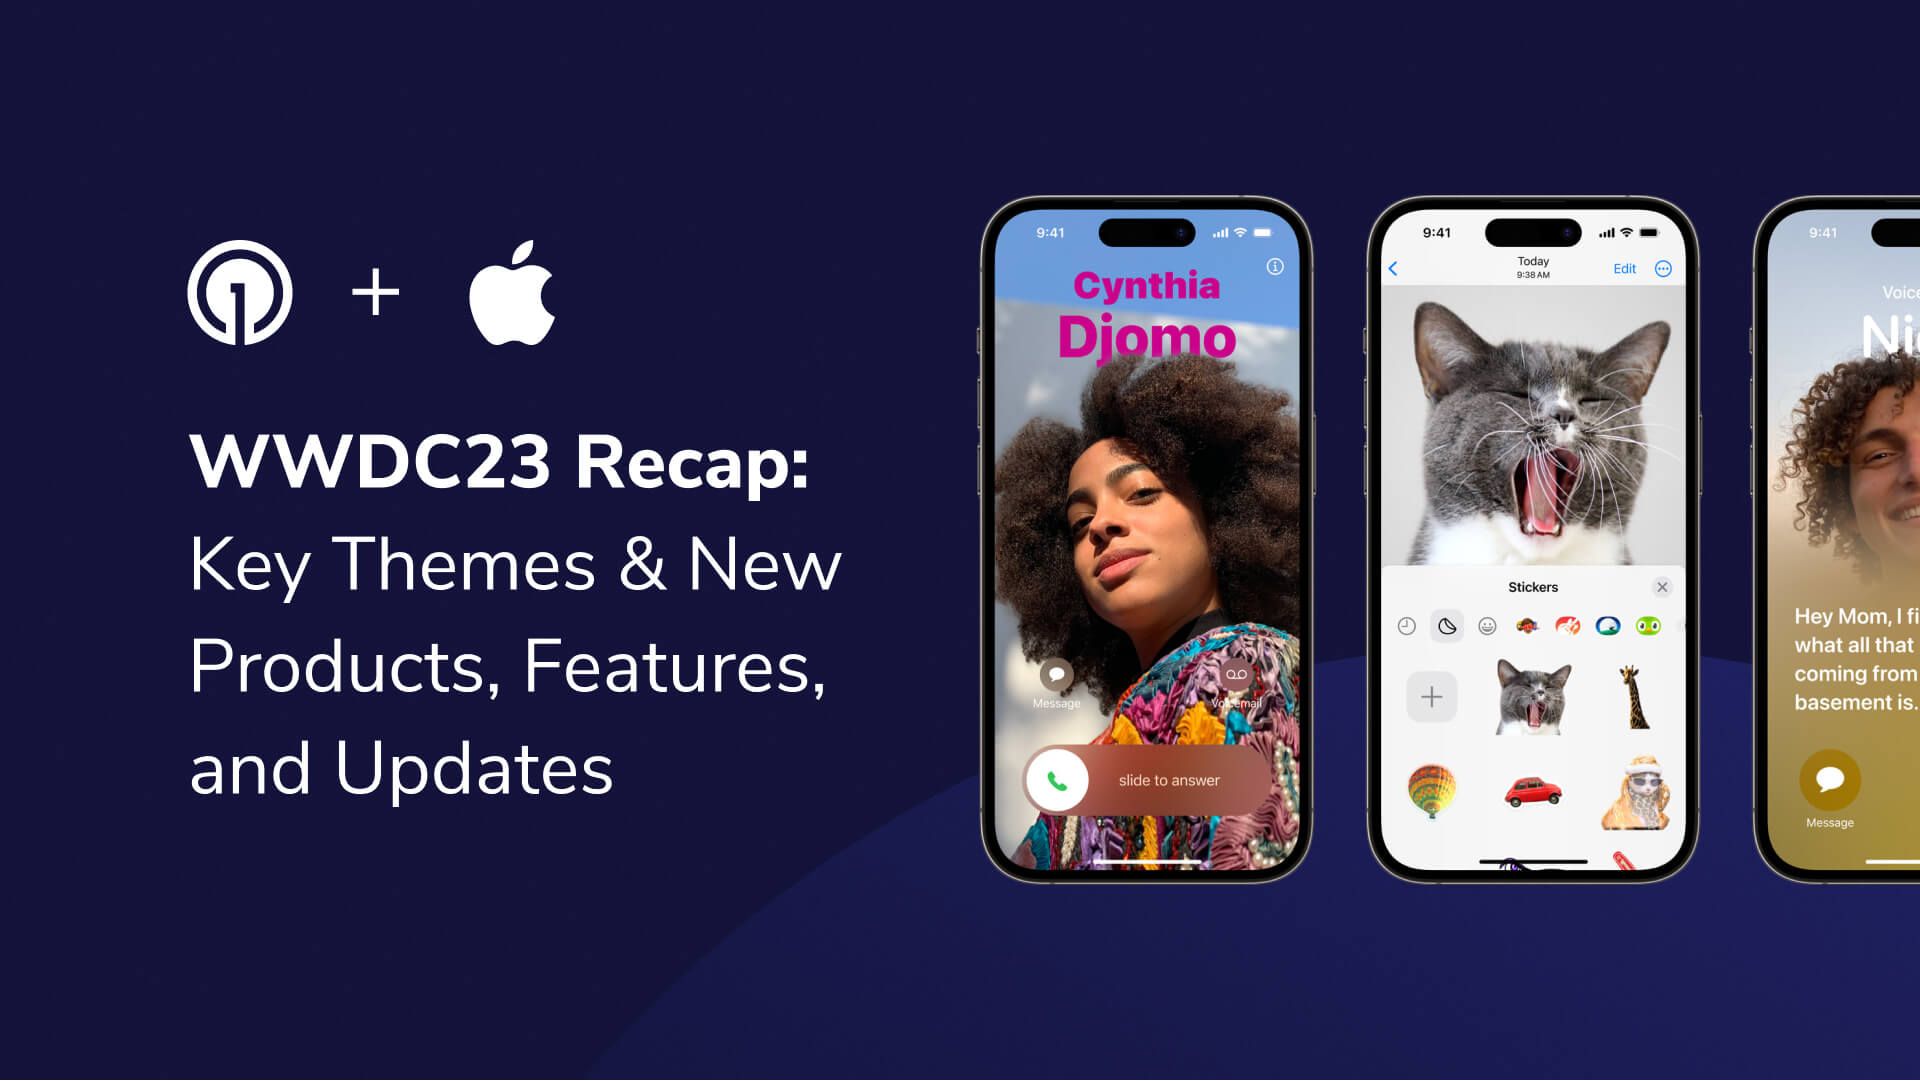 WWDC23 Recap: Key Features, Updates, and New Products